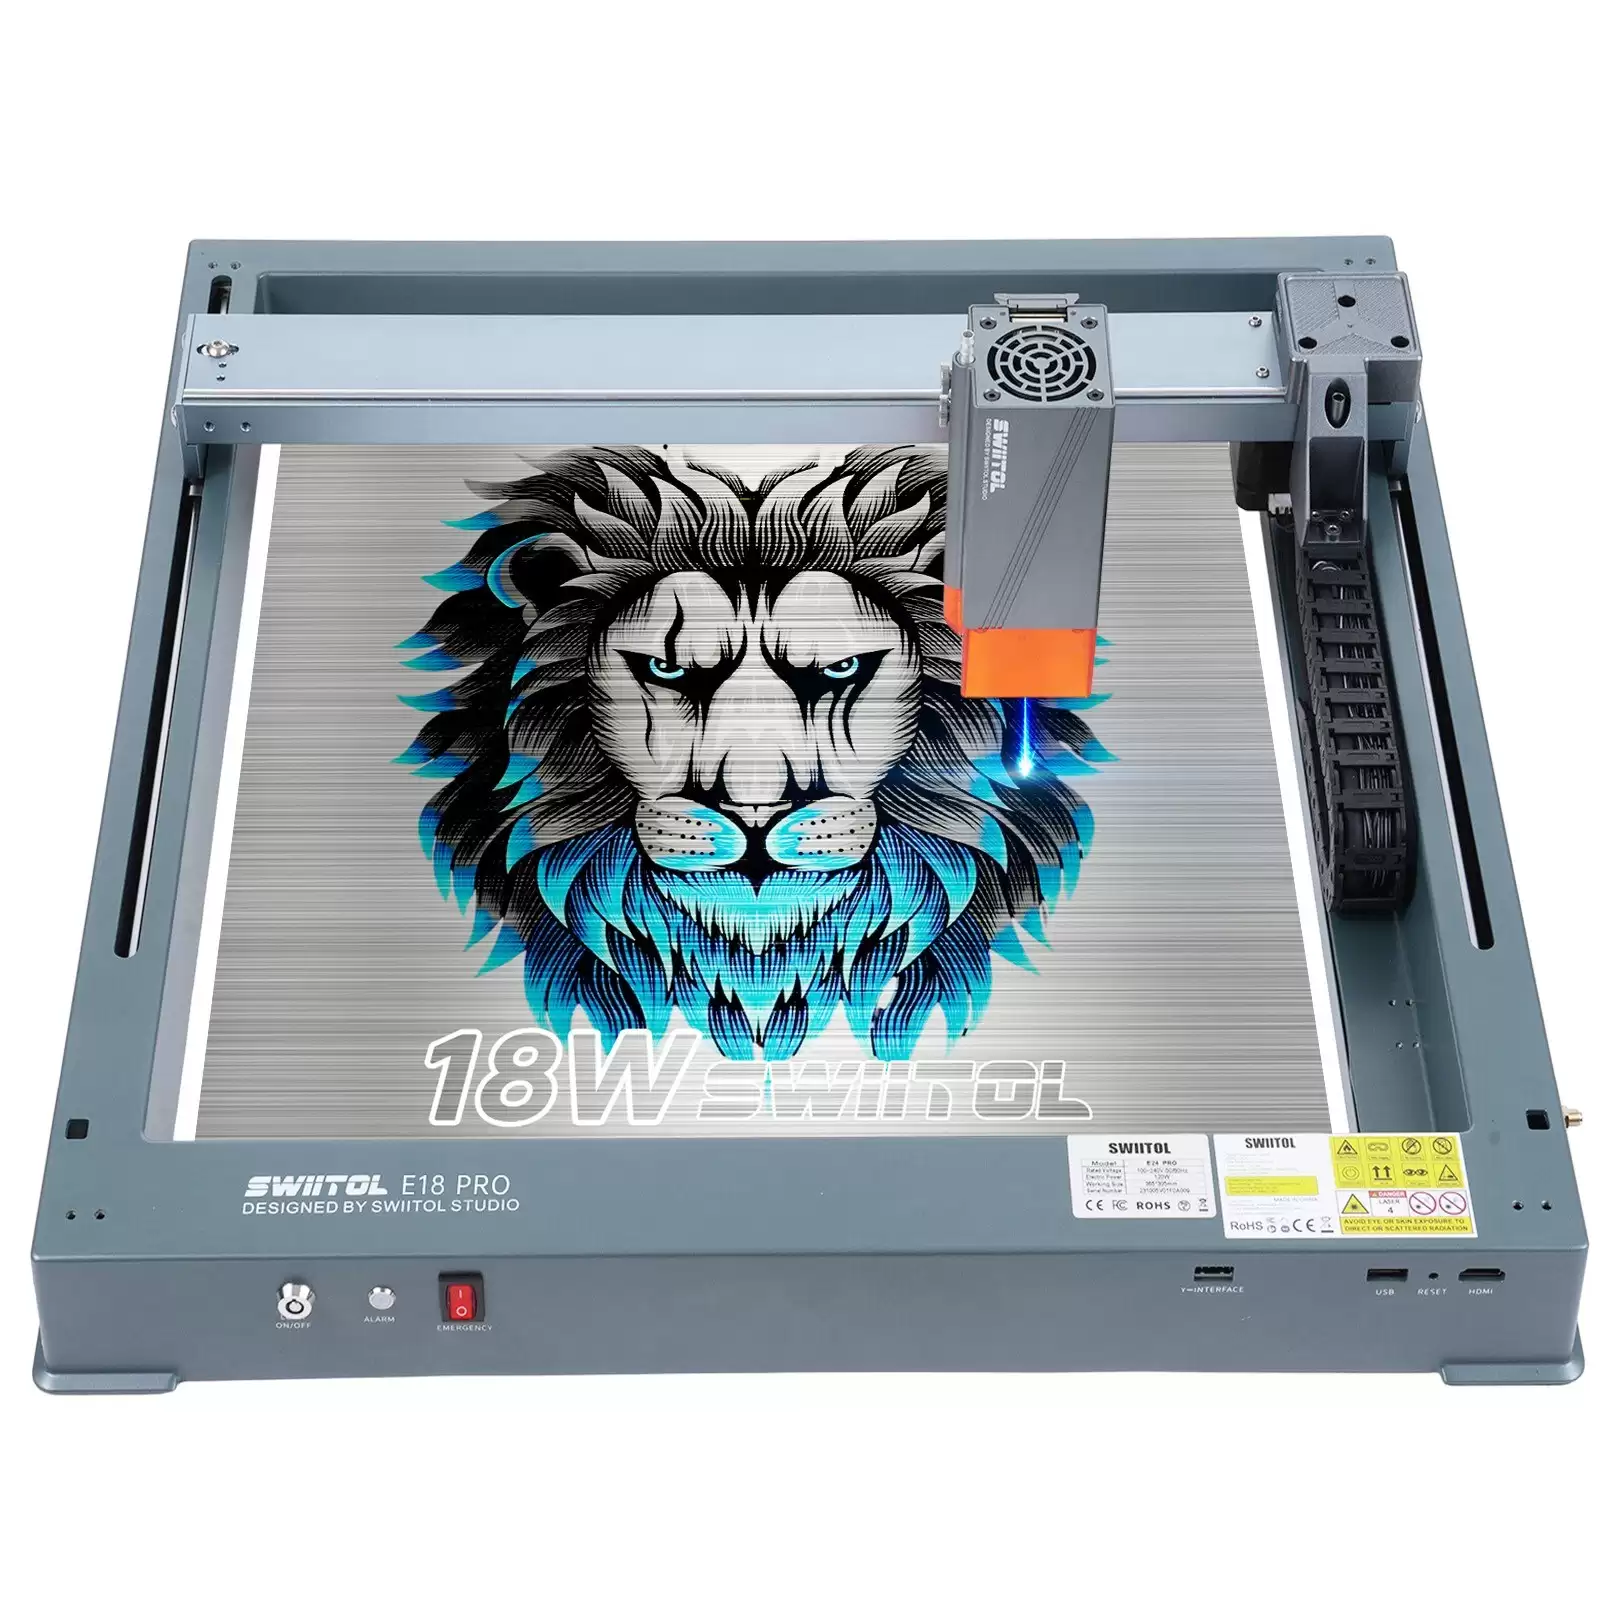 Order In Just €429 Swiitol E18 Pro 18w Laser Engraver Integrated Structure With This Discount Coupon At Cafago